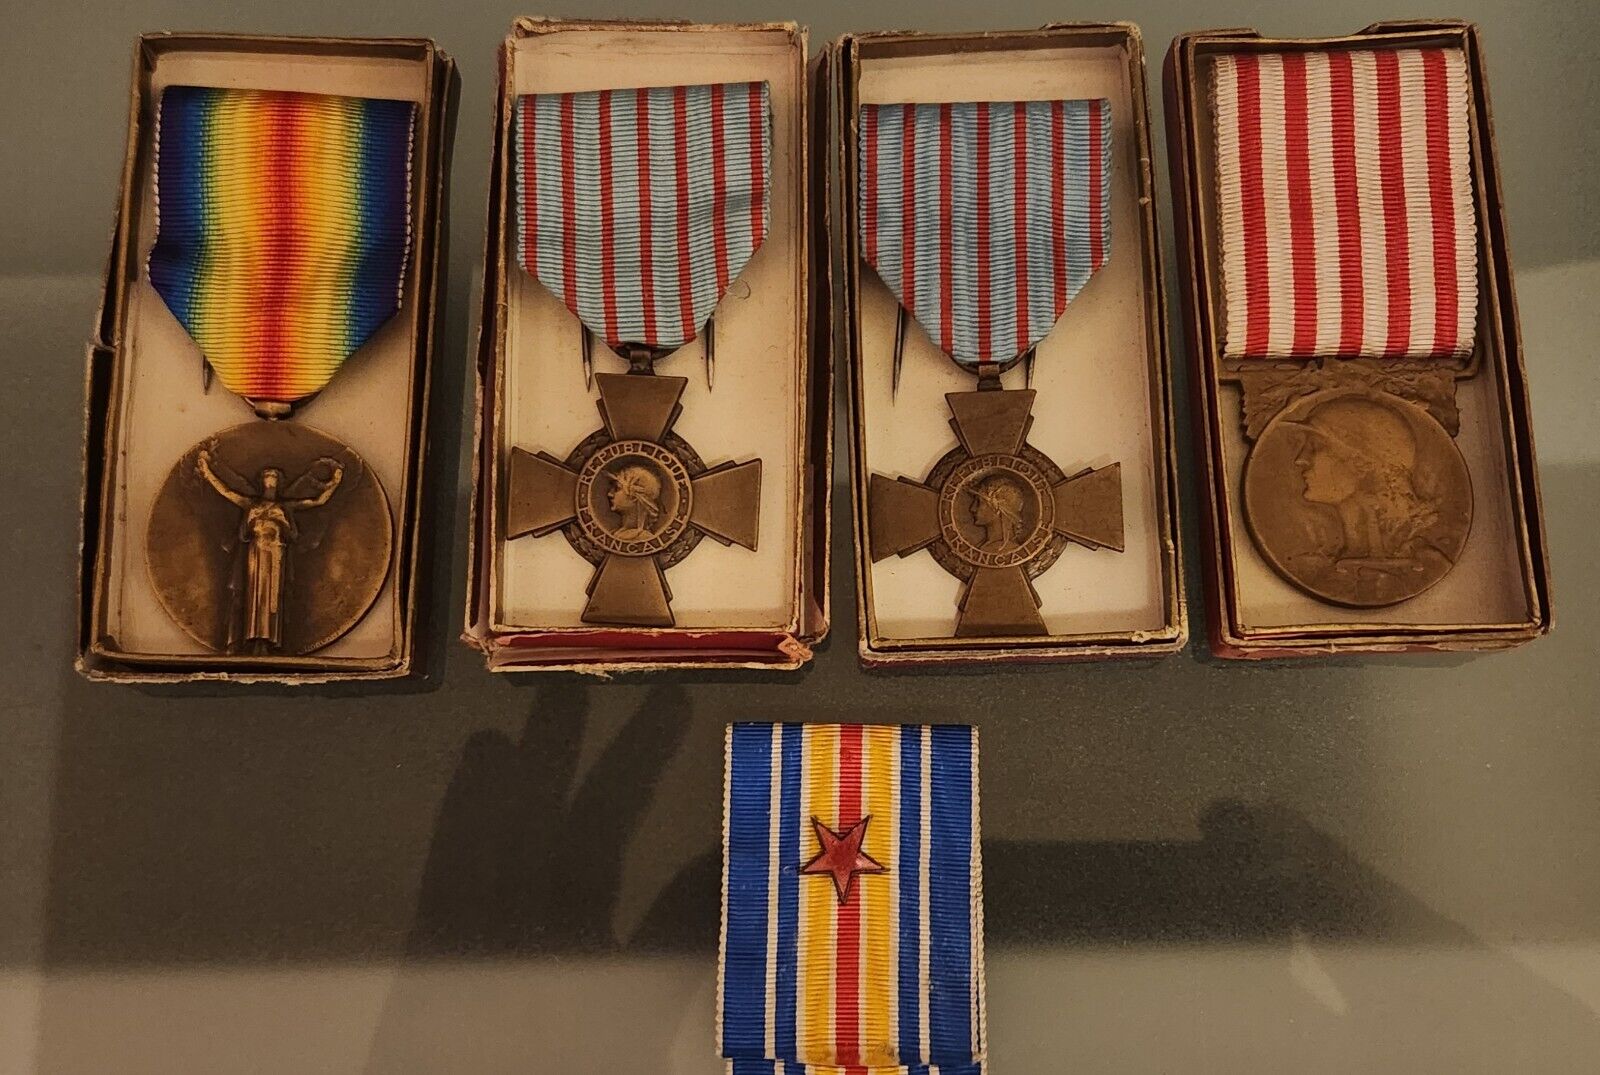 FRANCE FRENCH WW1 Medals Lot 1914 - 1918 Croix Combattant military World War 1